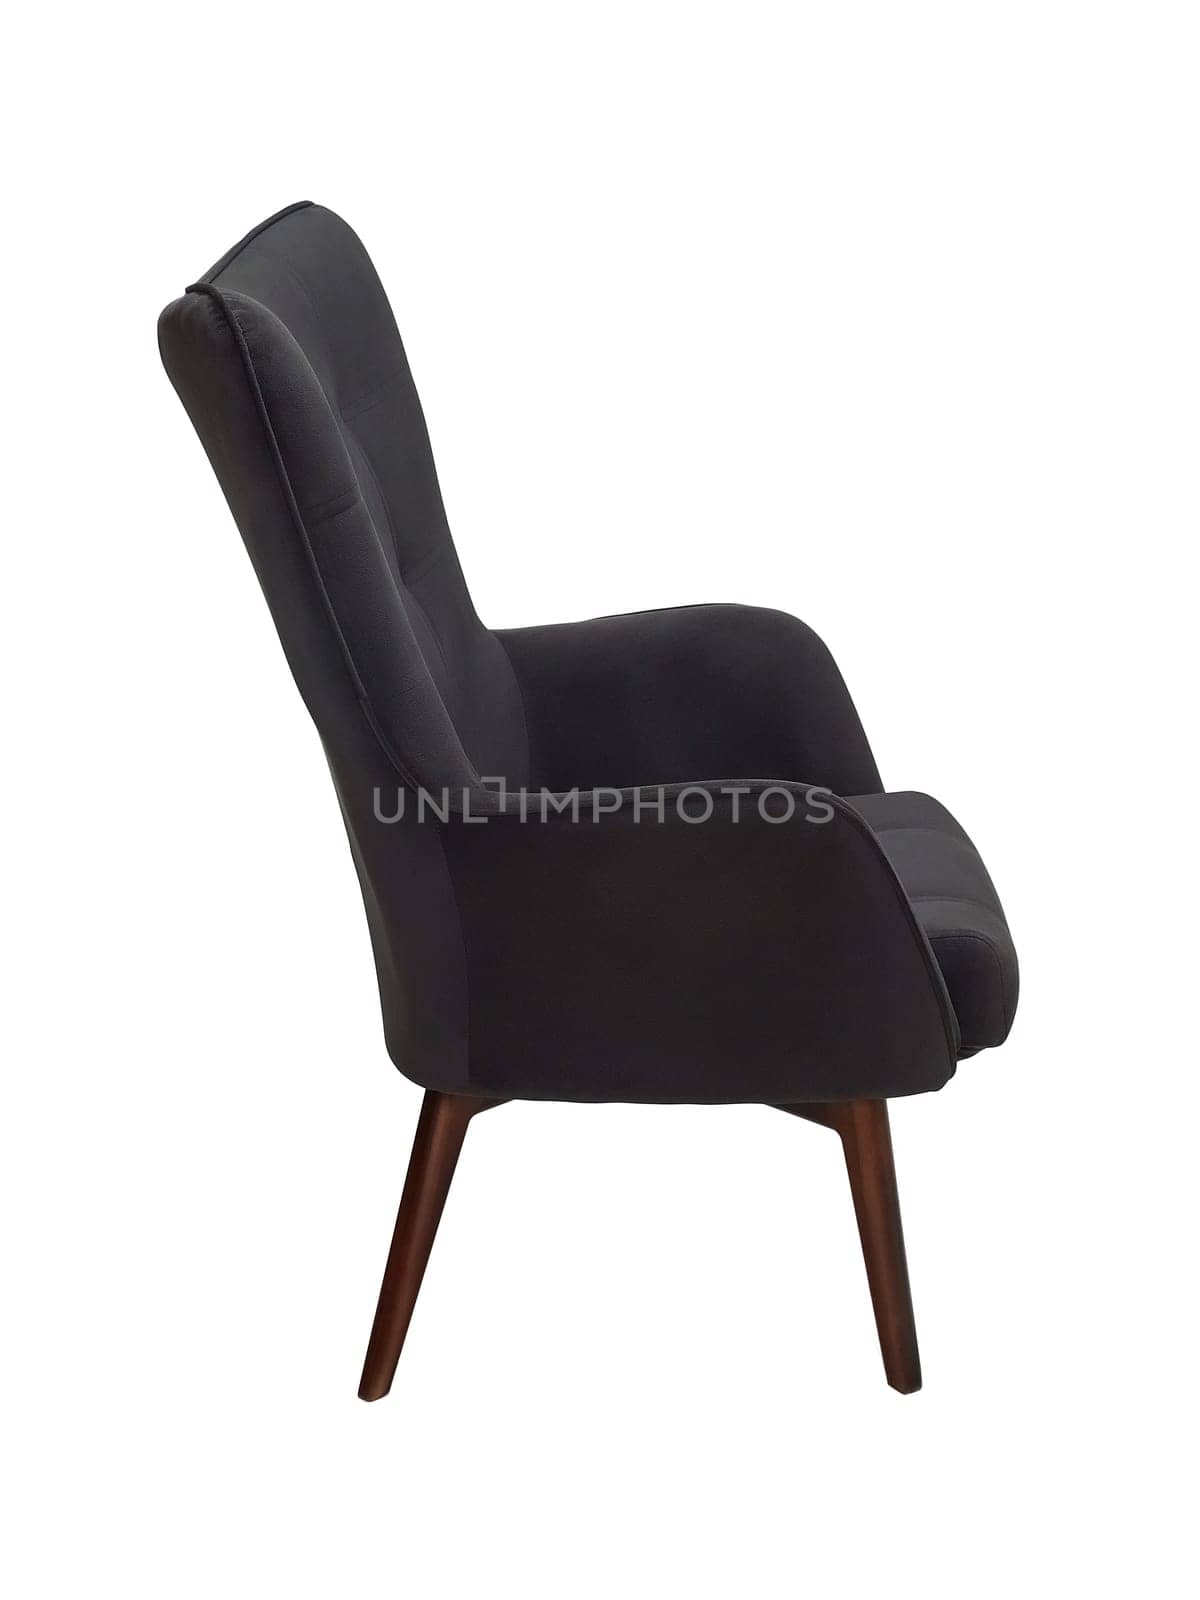 modern black fabric armchair with wooden legs isolated on white background, side view by artemzatsepilin